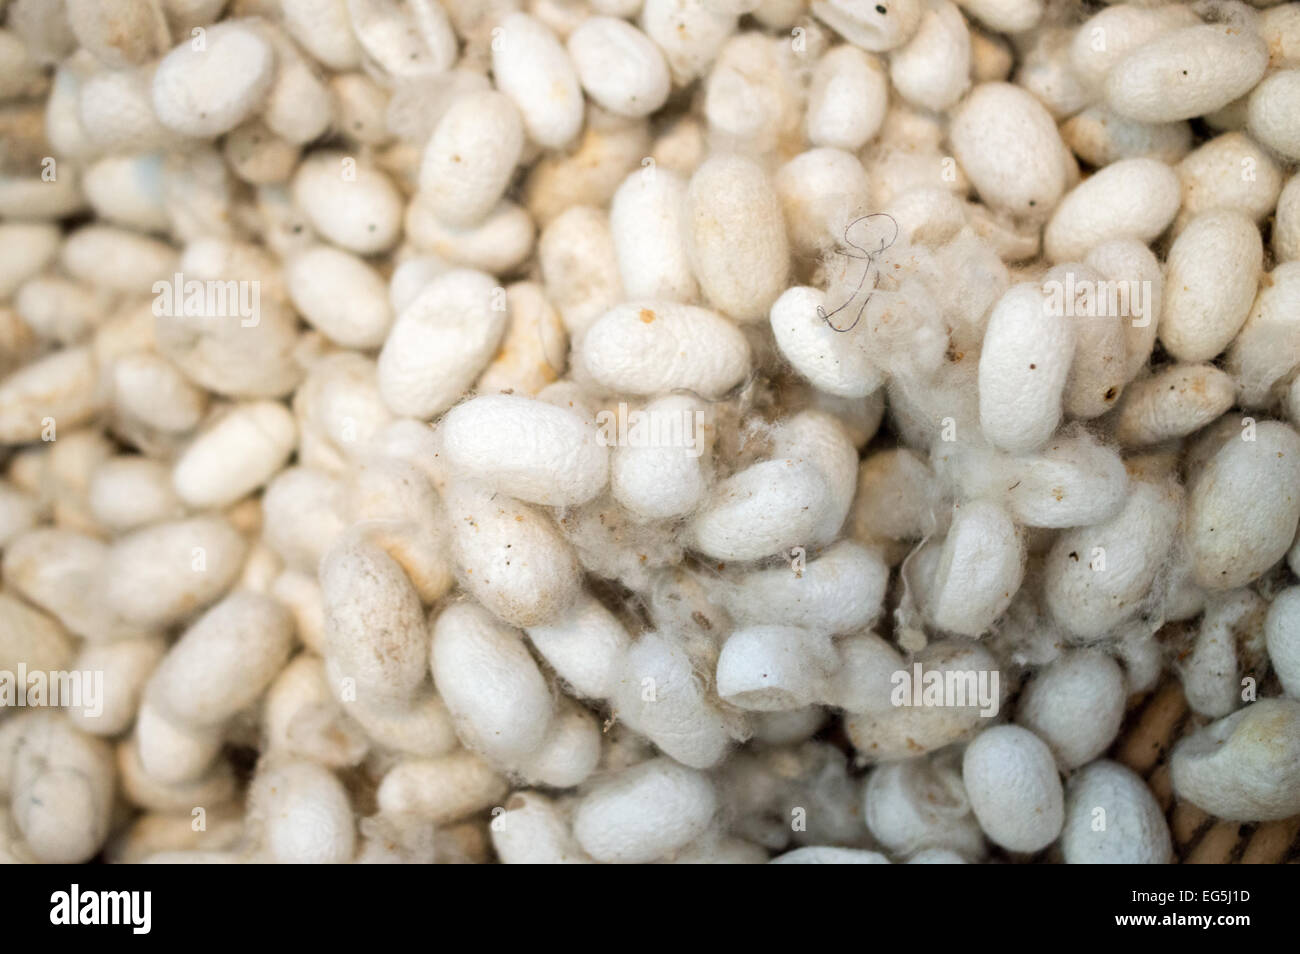 Full frame detail shot of raw, unprocessed silk worm cocoons Stock Photo